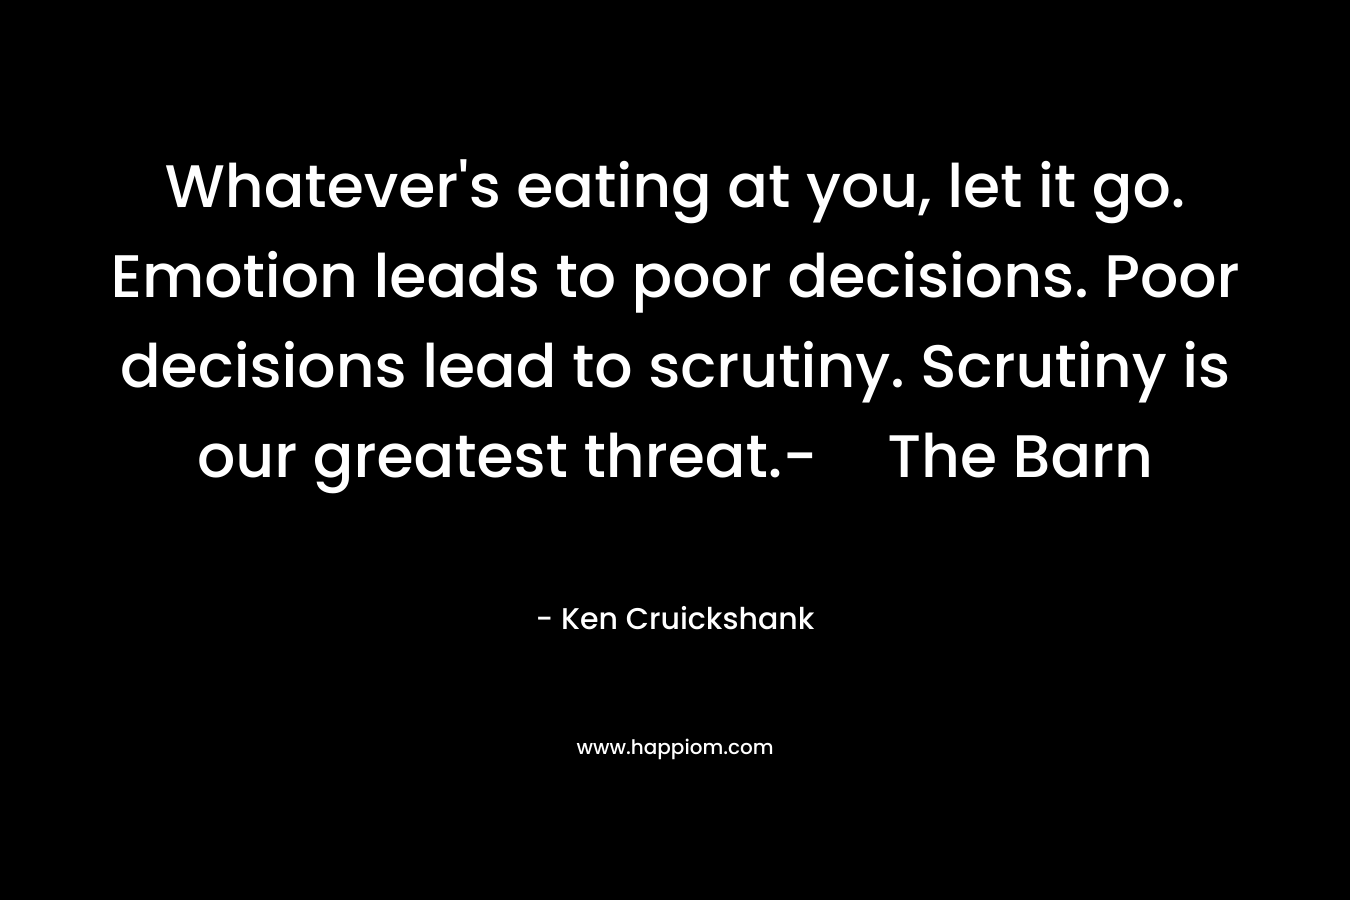 Whatever’s eating at you, let it go. Emotion leads to poor decisions. Poor decisions lead to scrutiny. Scrutiny is our greatest threat.-The Barn – Ken Cruickshank